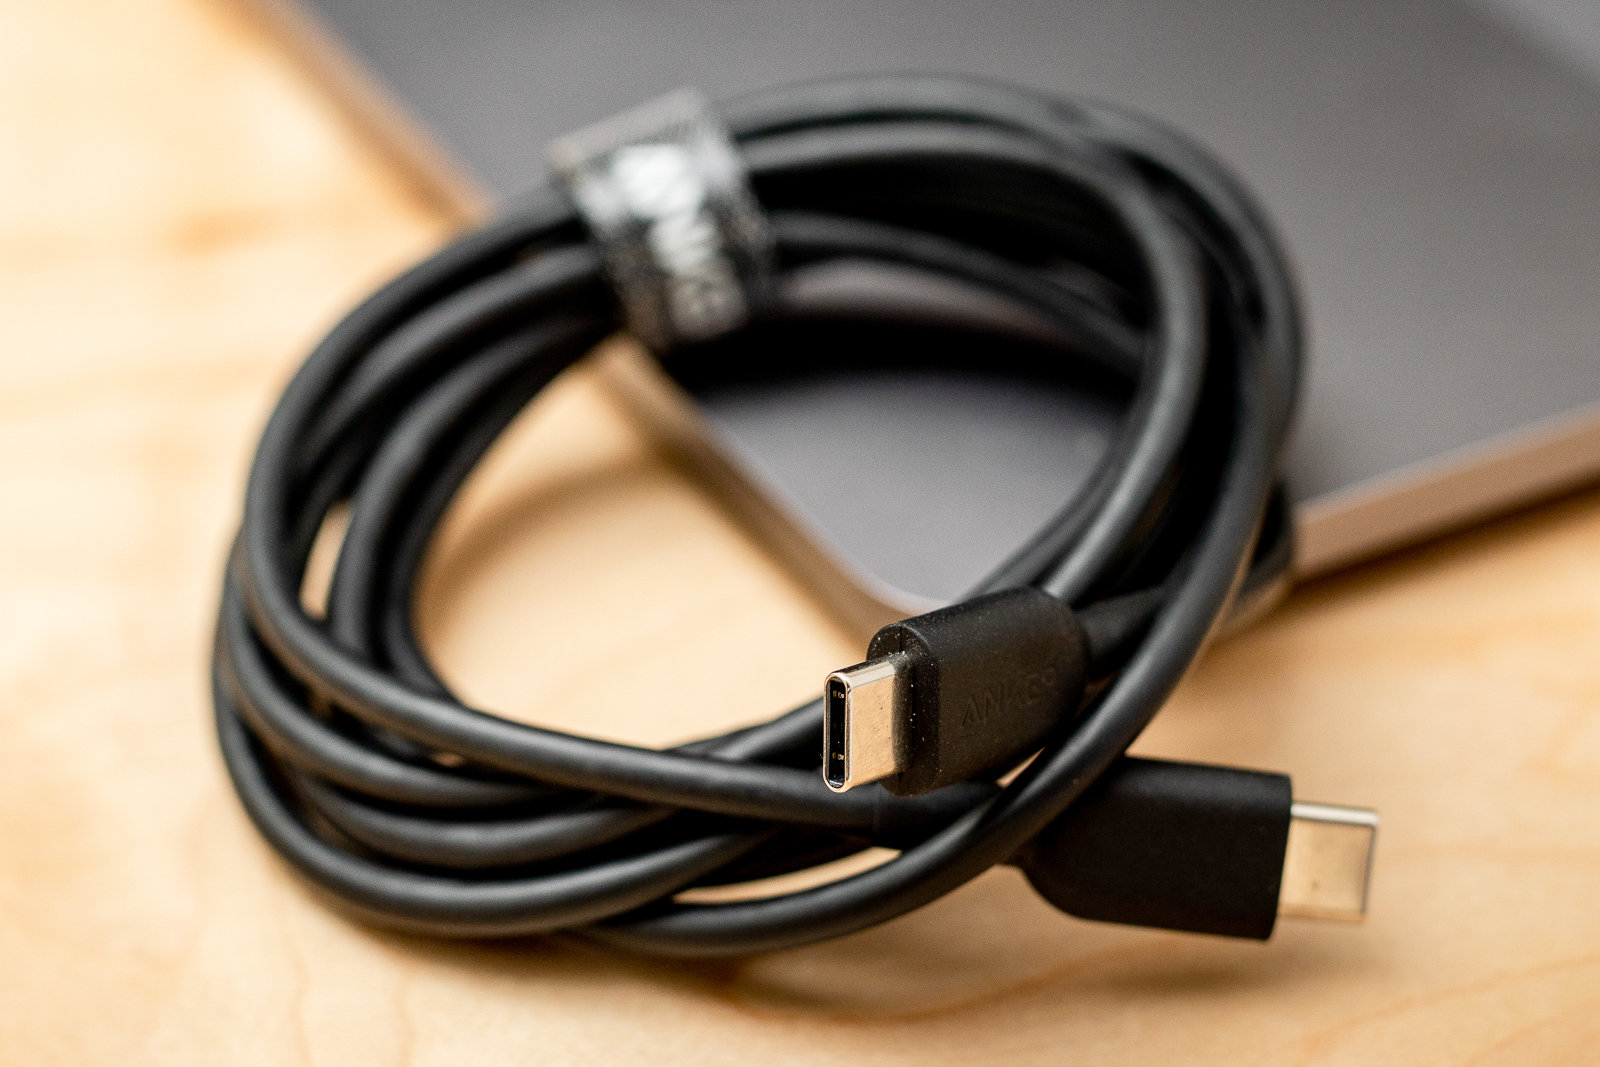 USB-cables and adapters